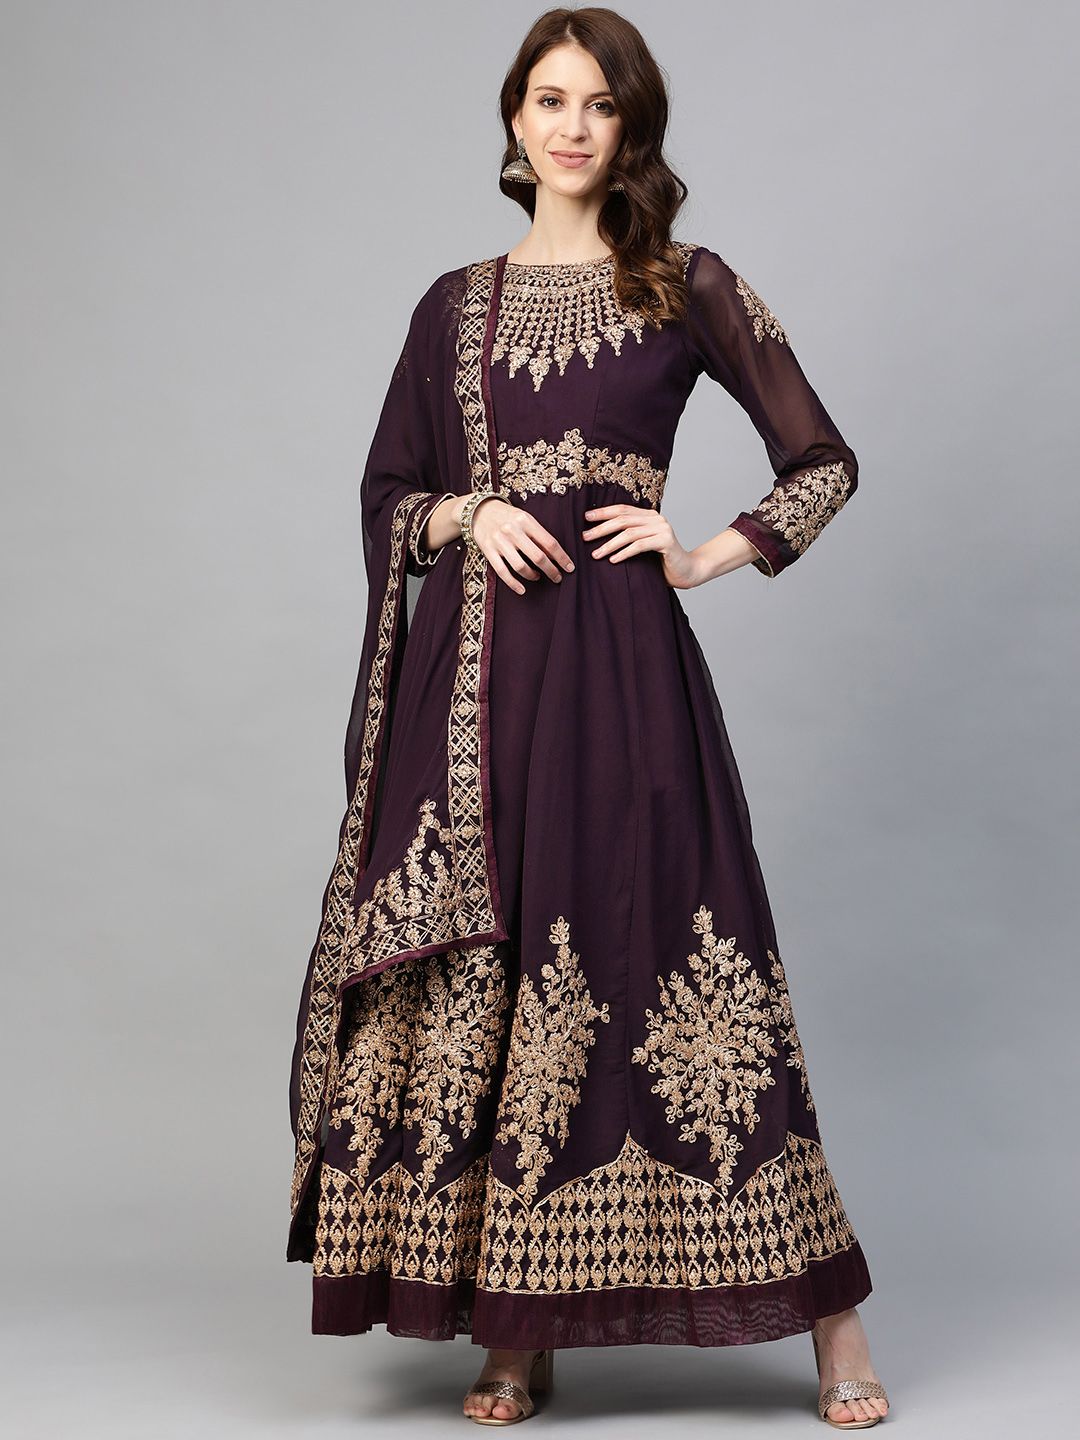 Readiprint Fashions Burgundy & Golden Embroidered Semi-Stitched Dress Material Price in India